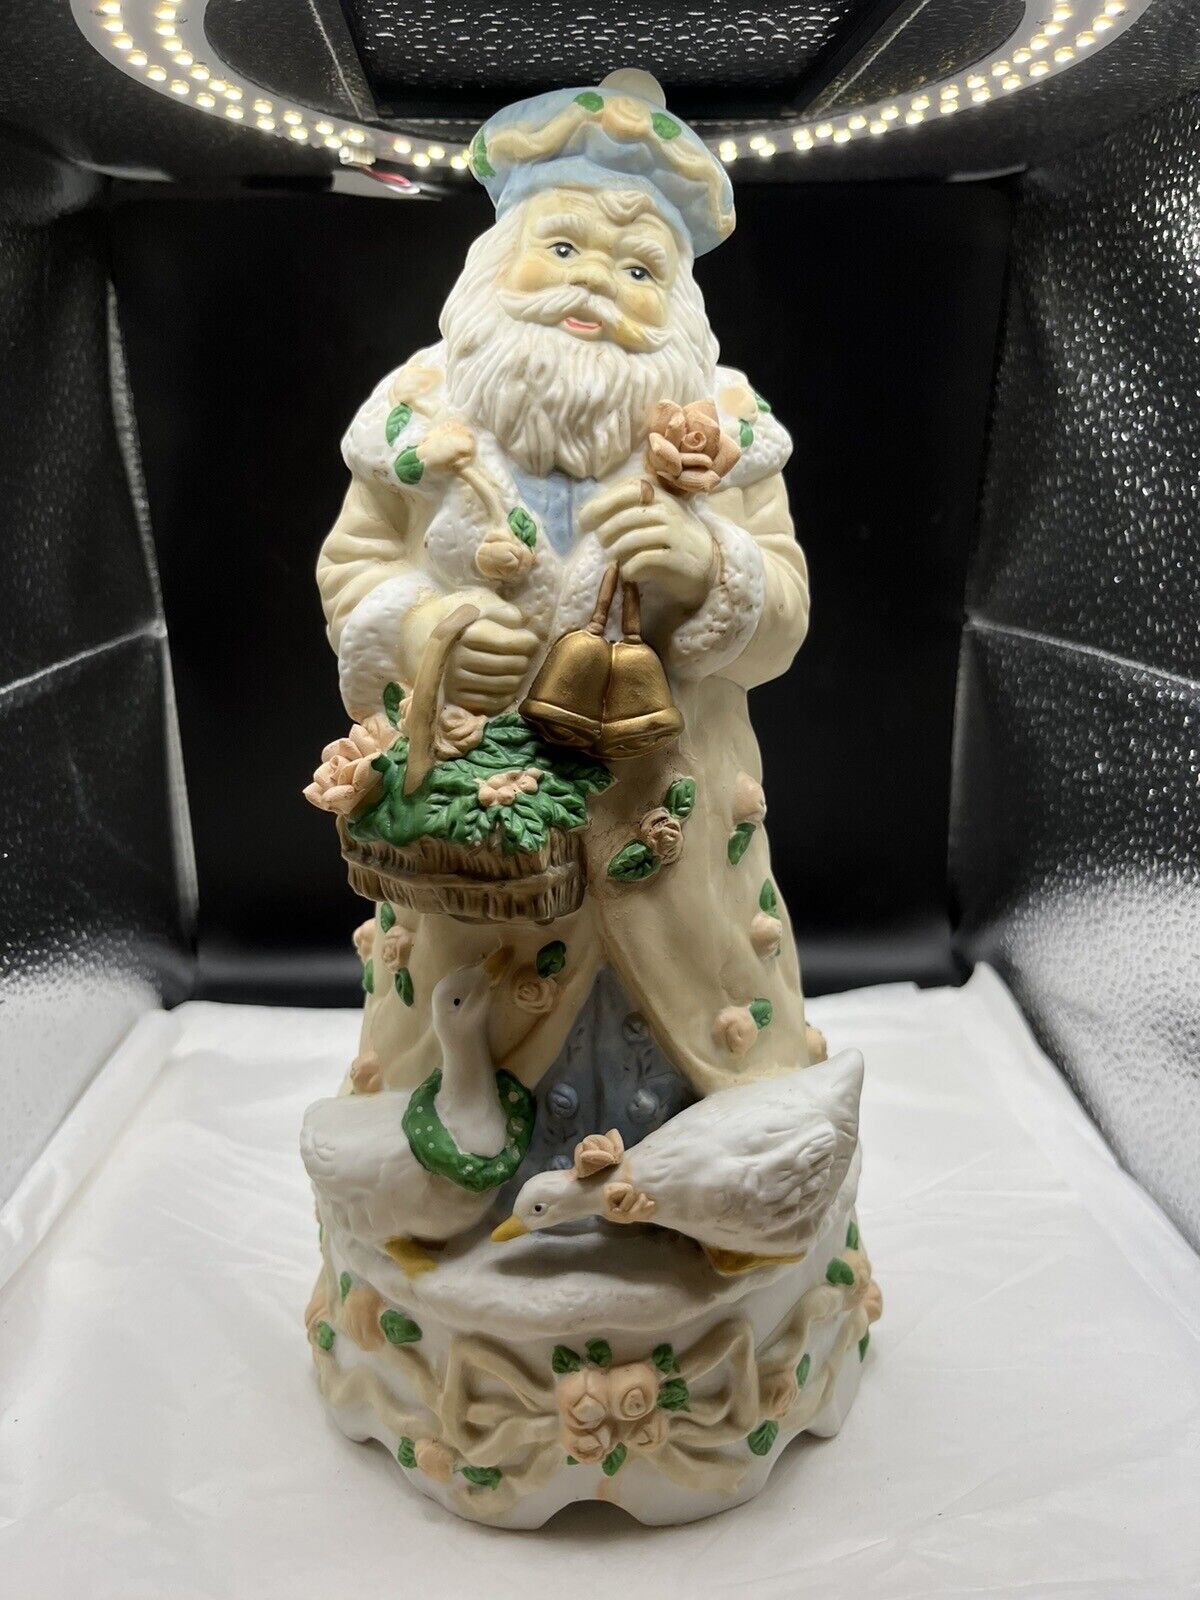 Vintage Old World Santa Music Box Plays Have Yourself A Merry Little Christmas. 